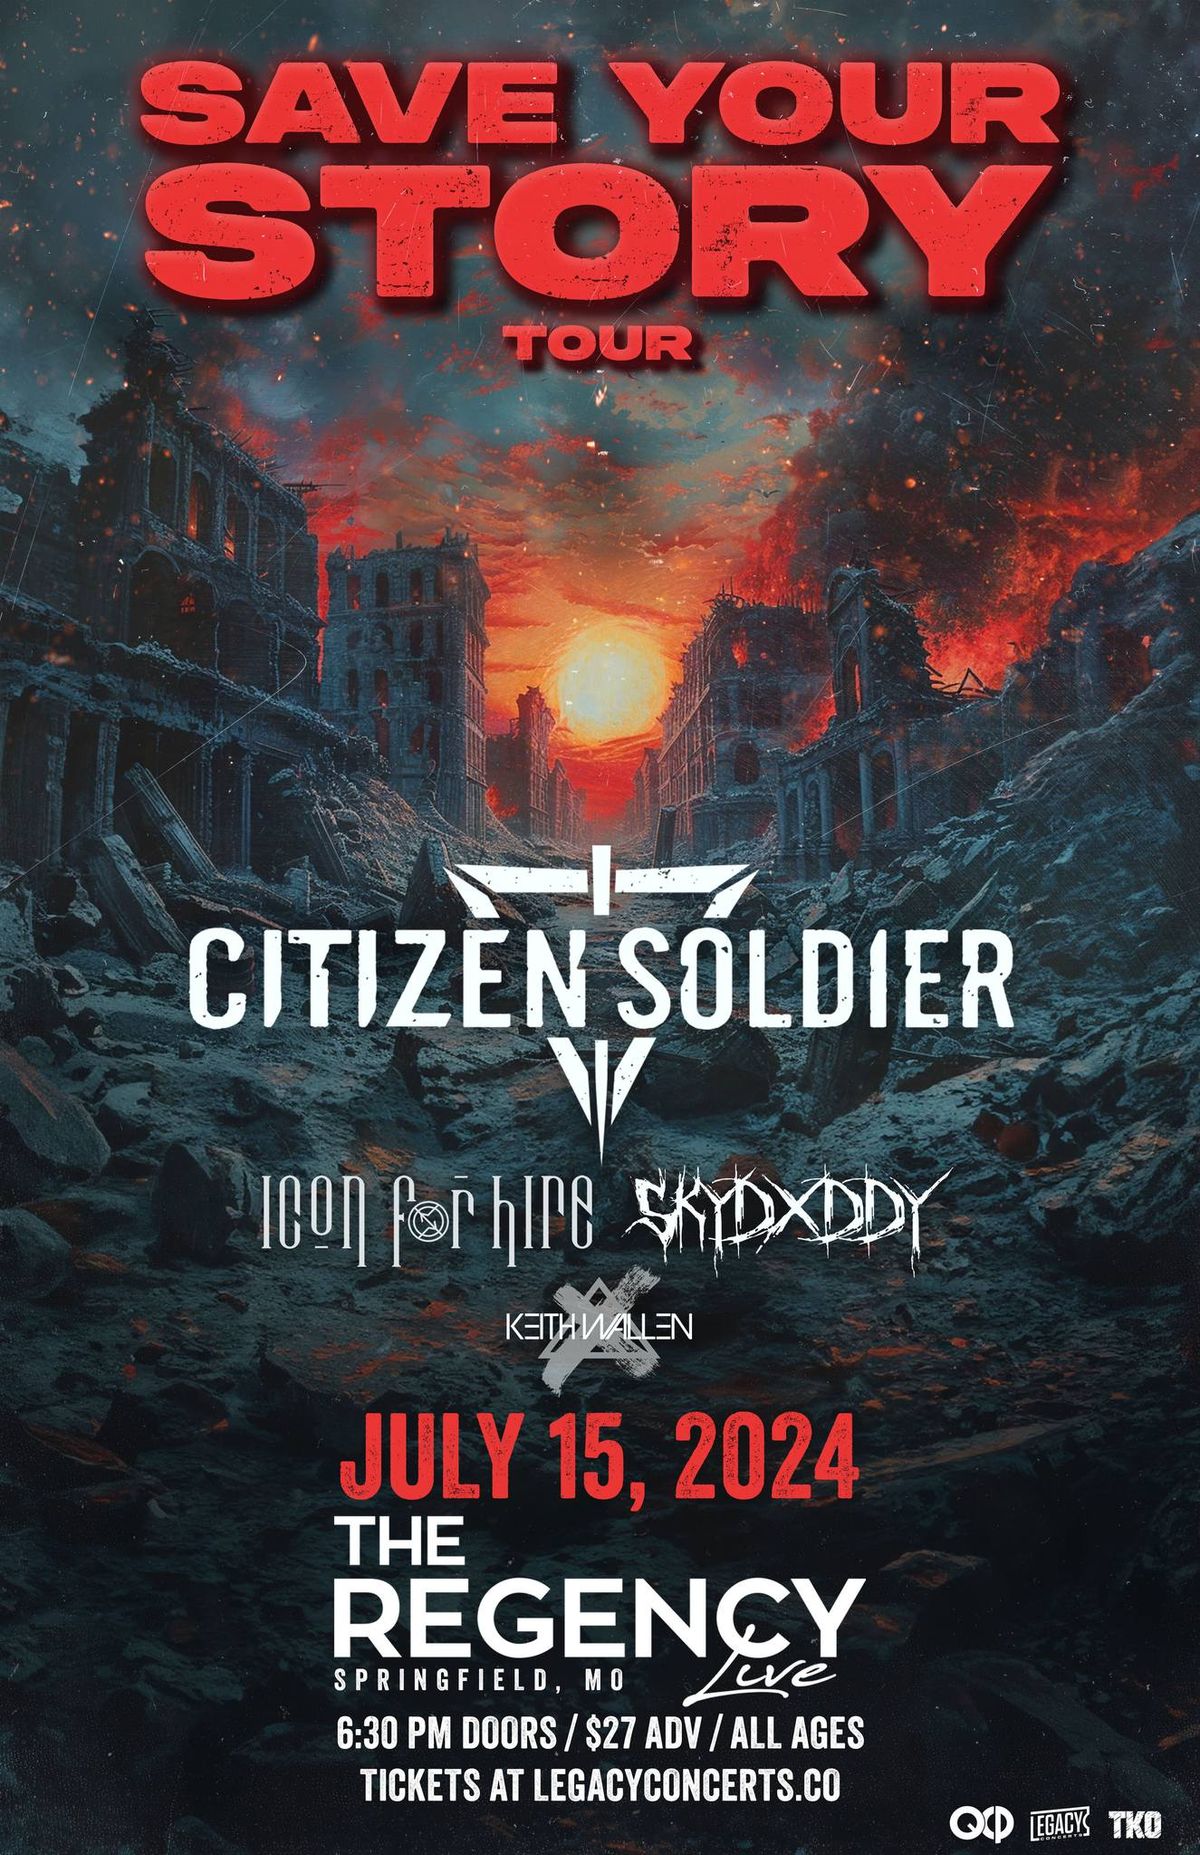 Citizen Soldier: Save Your Story Tour at The Regency